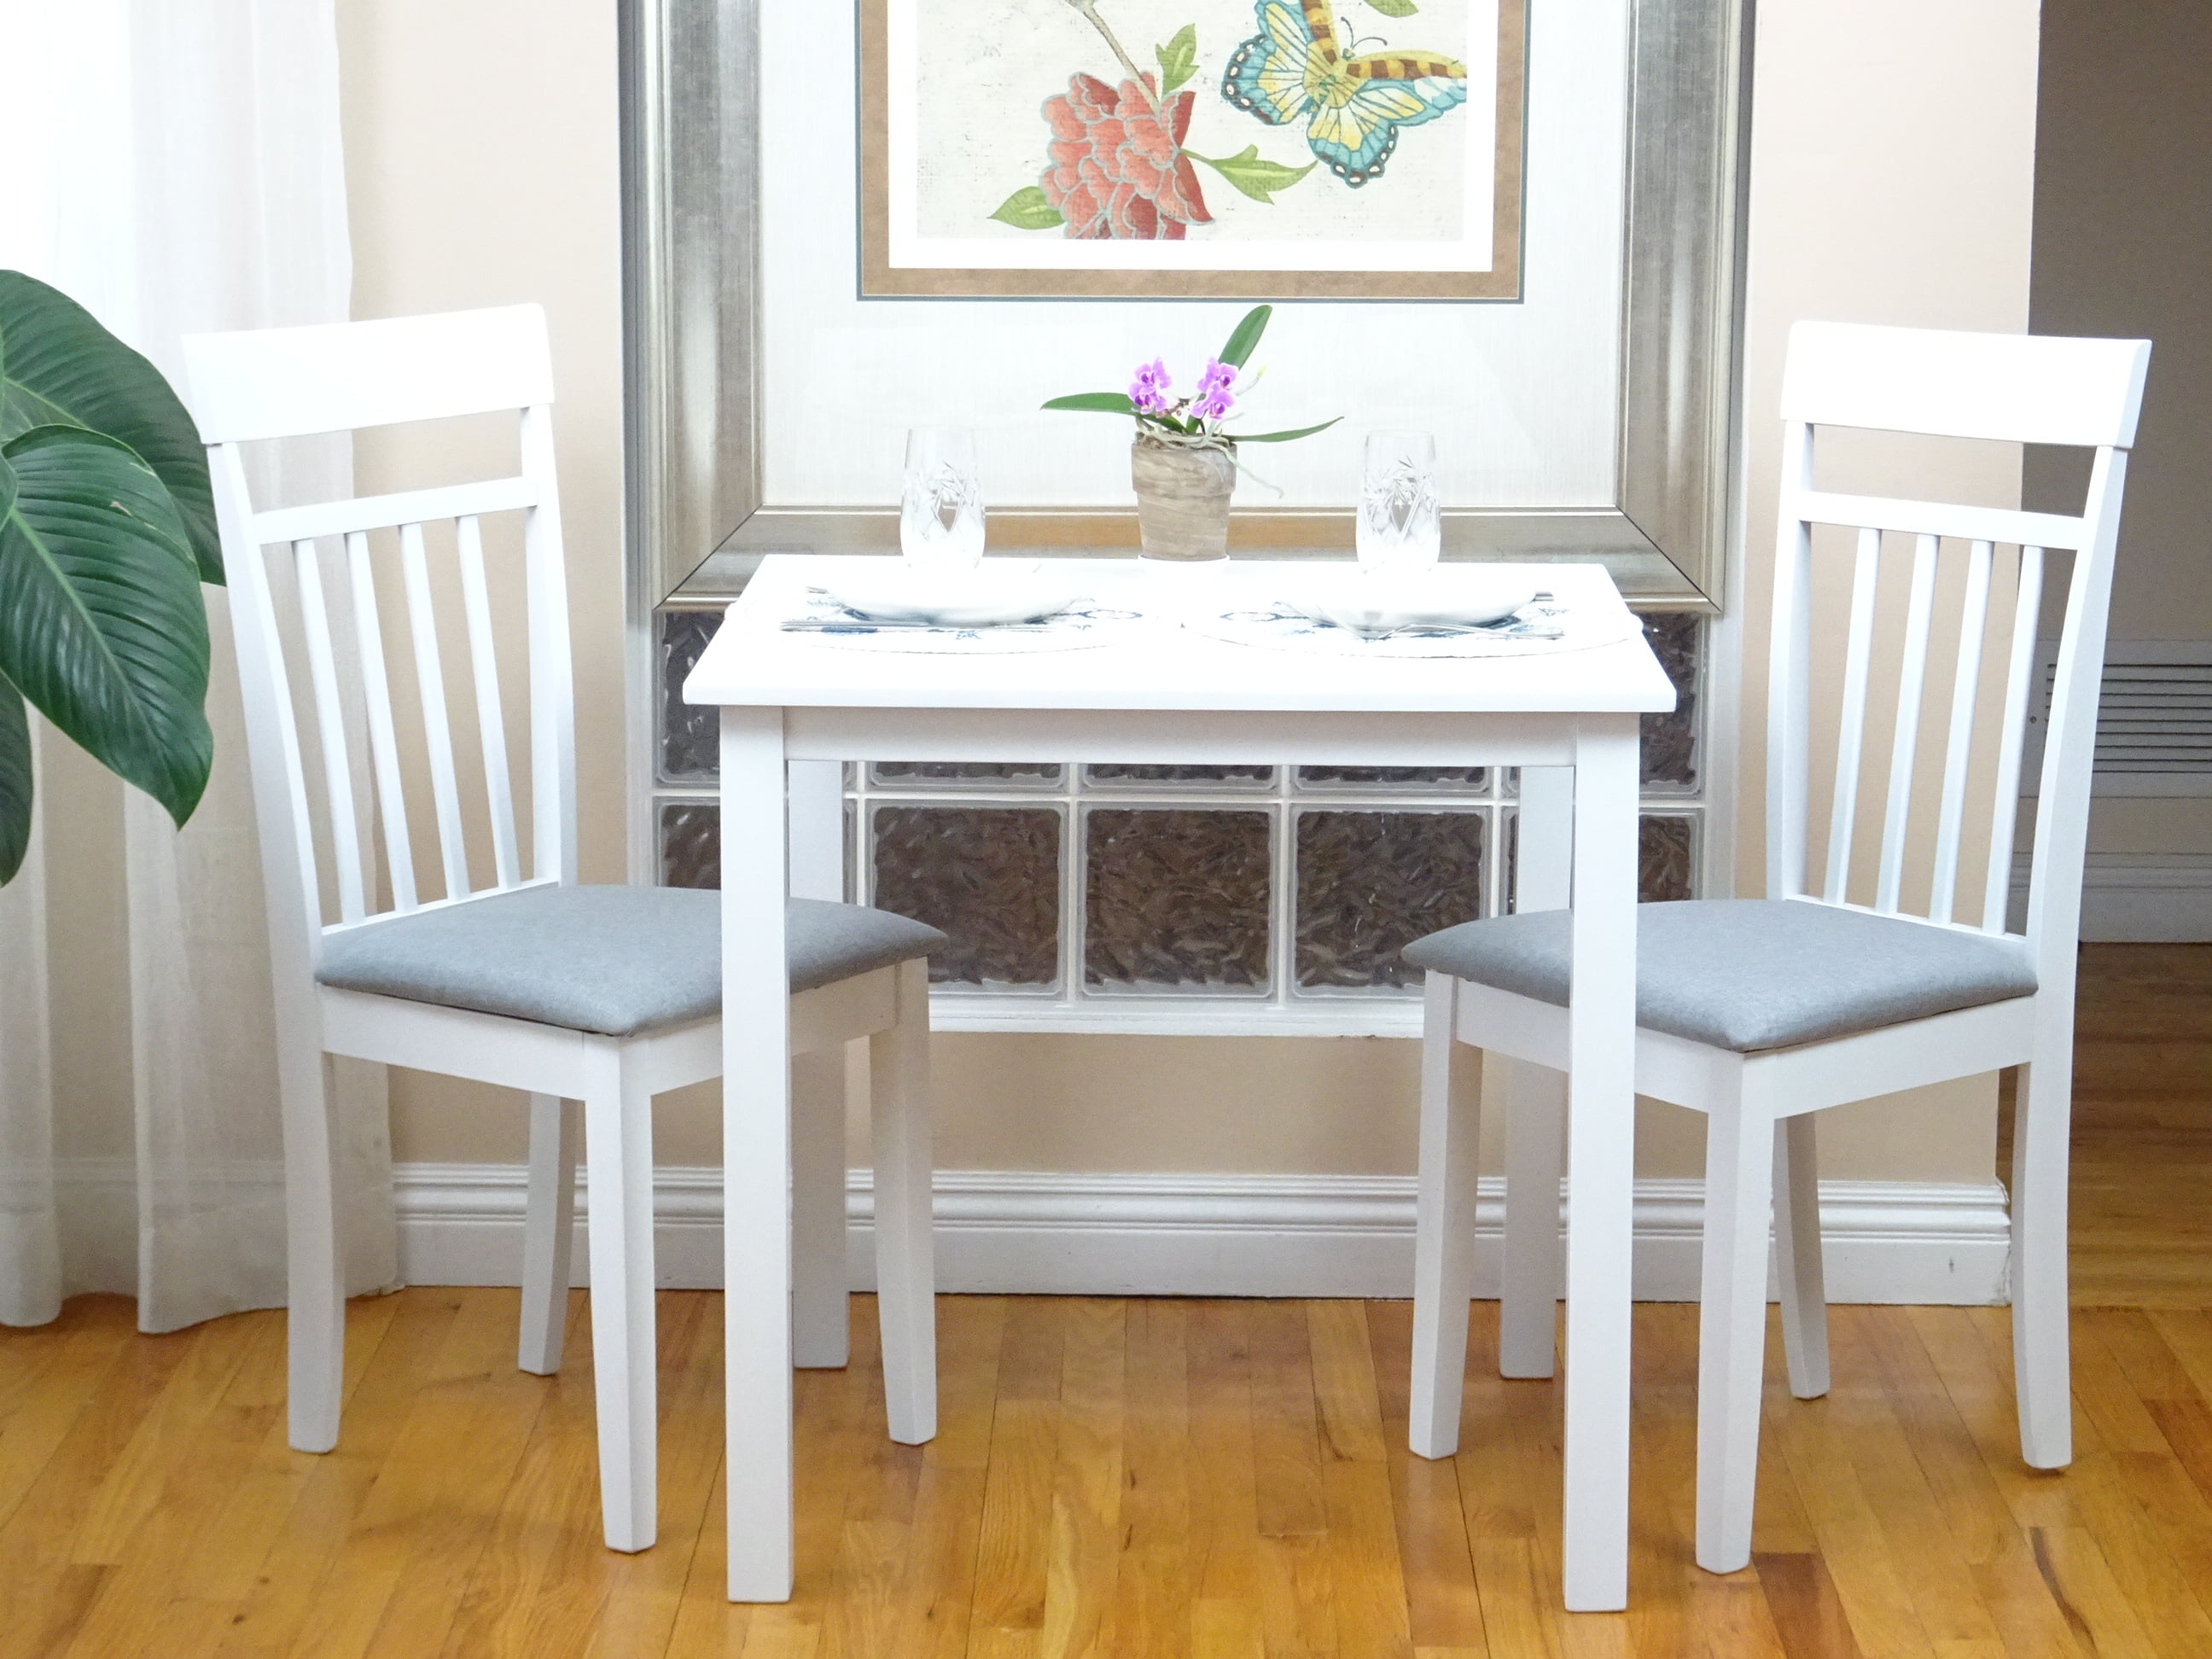 Small Kitchen Table And Two Chairs Image to u